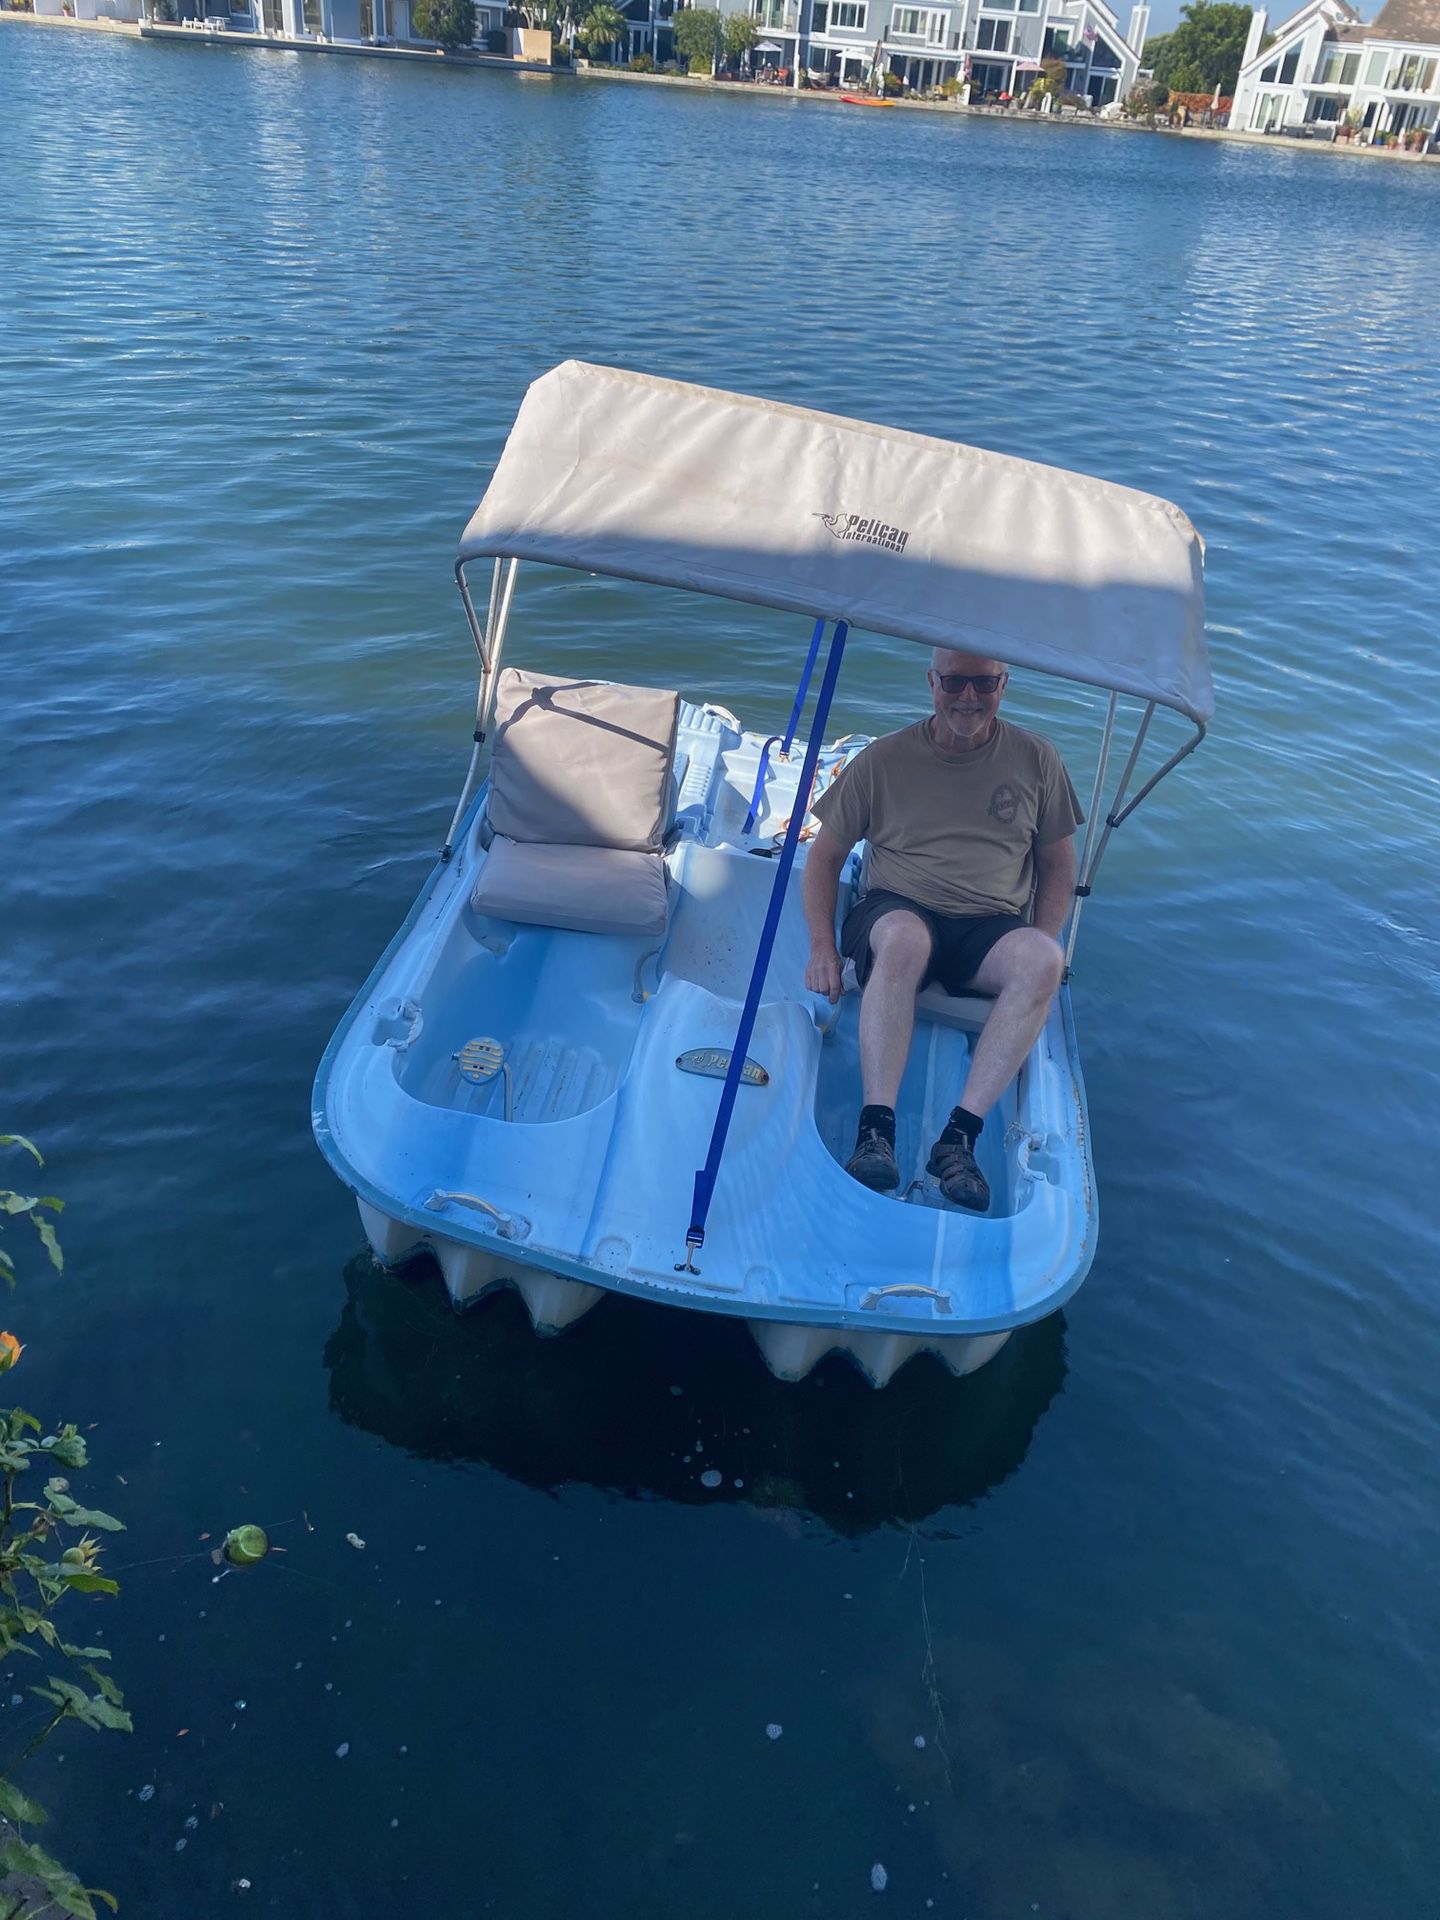 Pelican five-seat paddle boat with sun cover, cushions and battery-operated motor